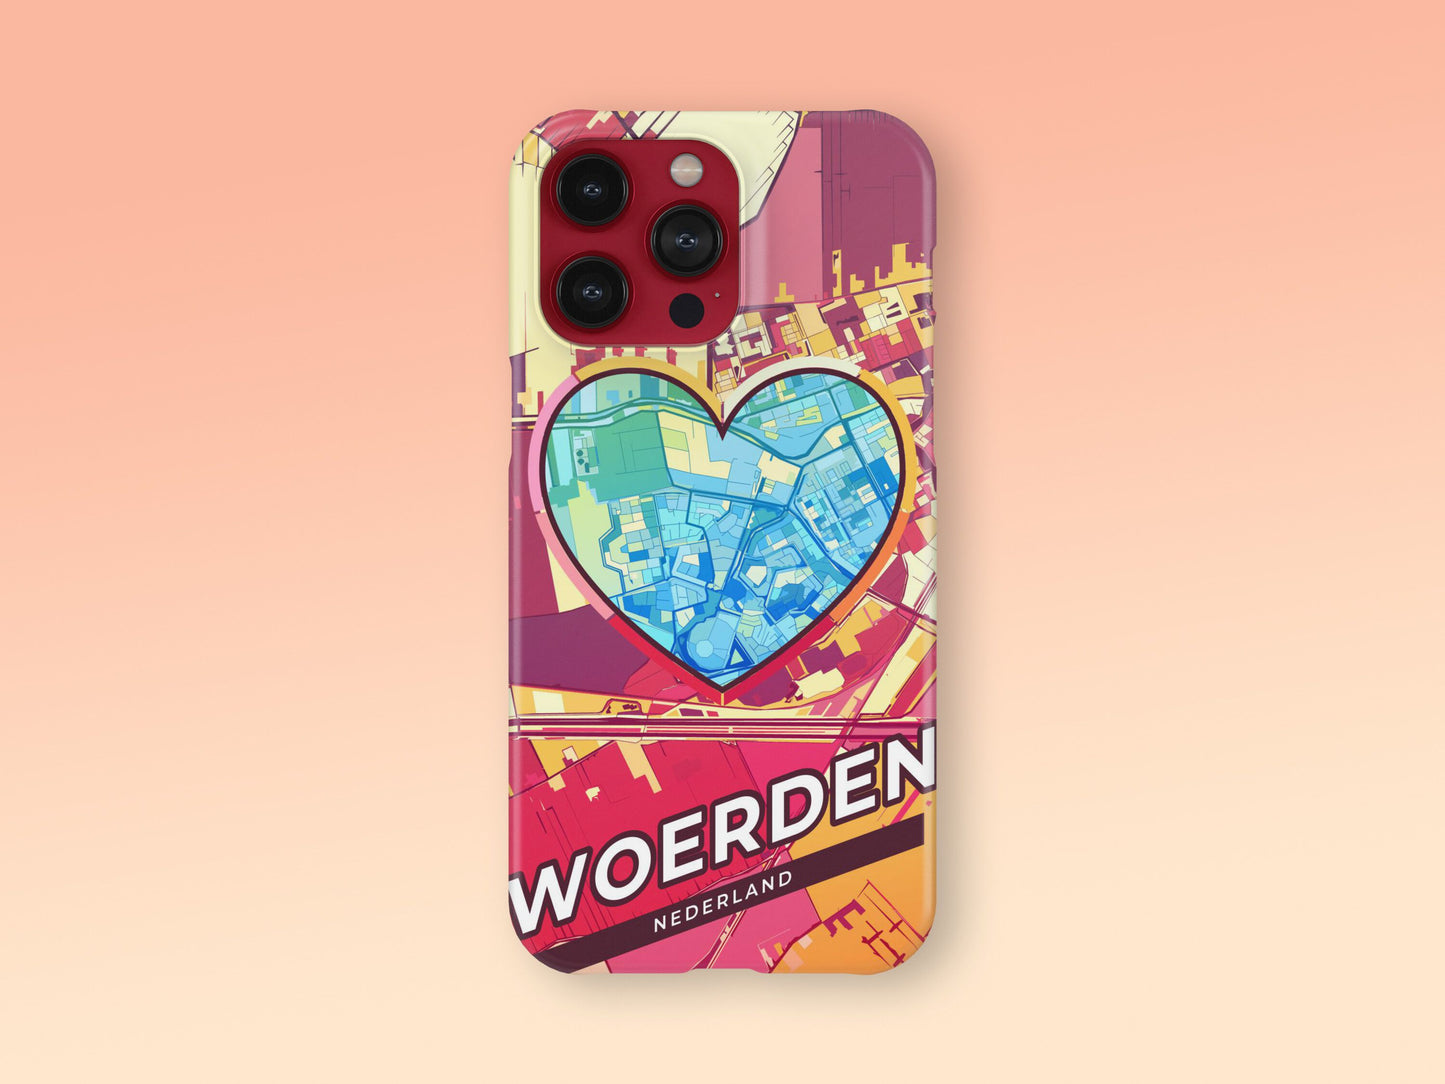 Woerden Netherlands slim phone case with colorful icon 2